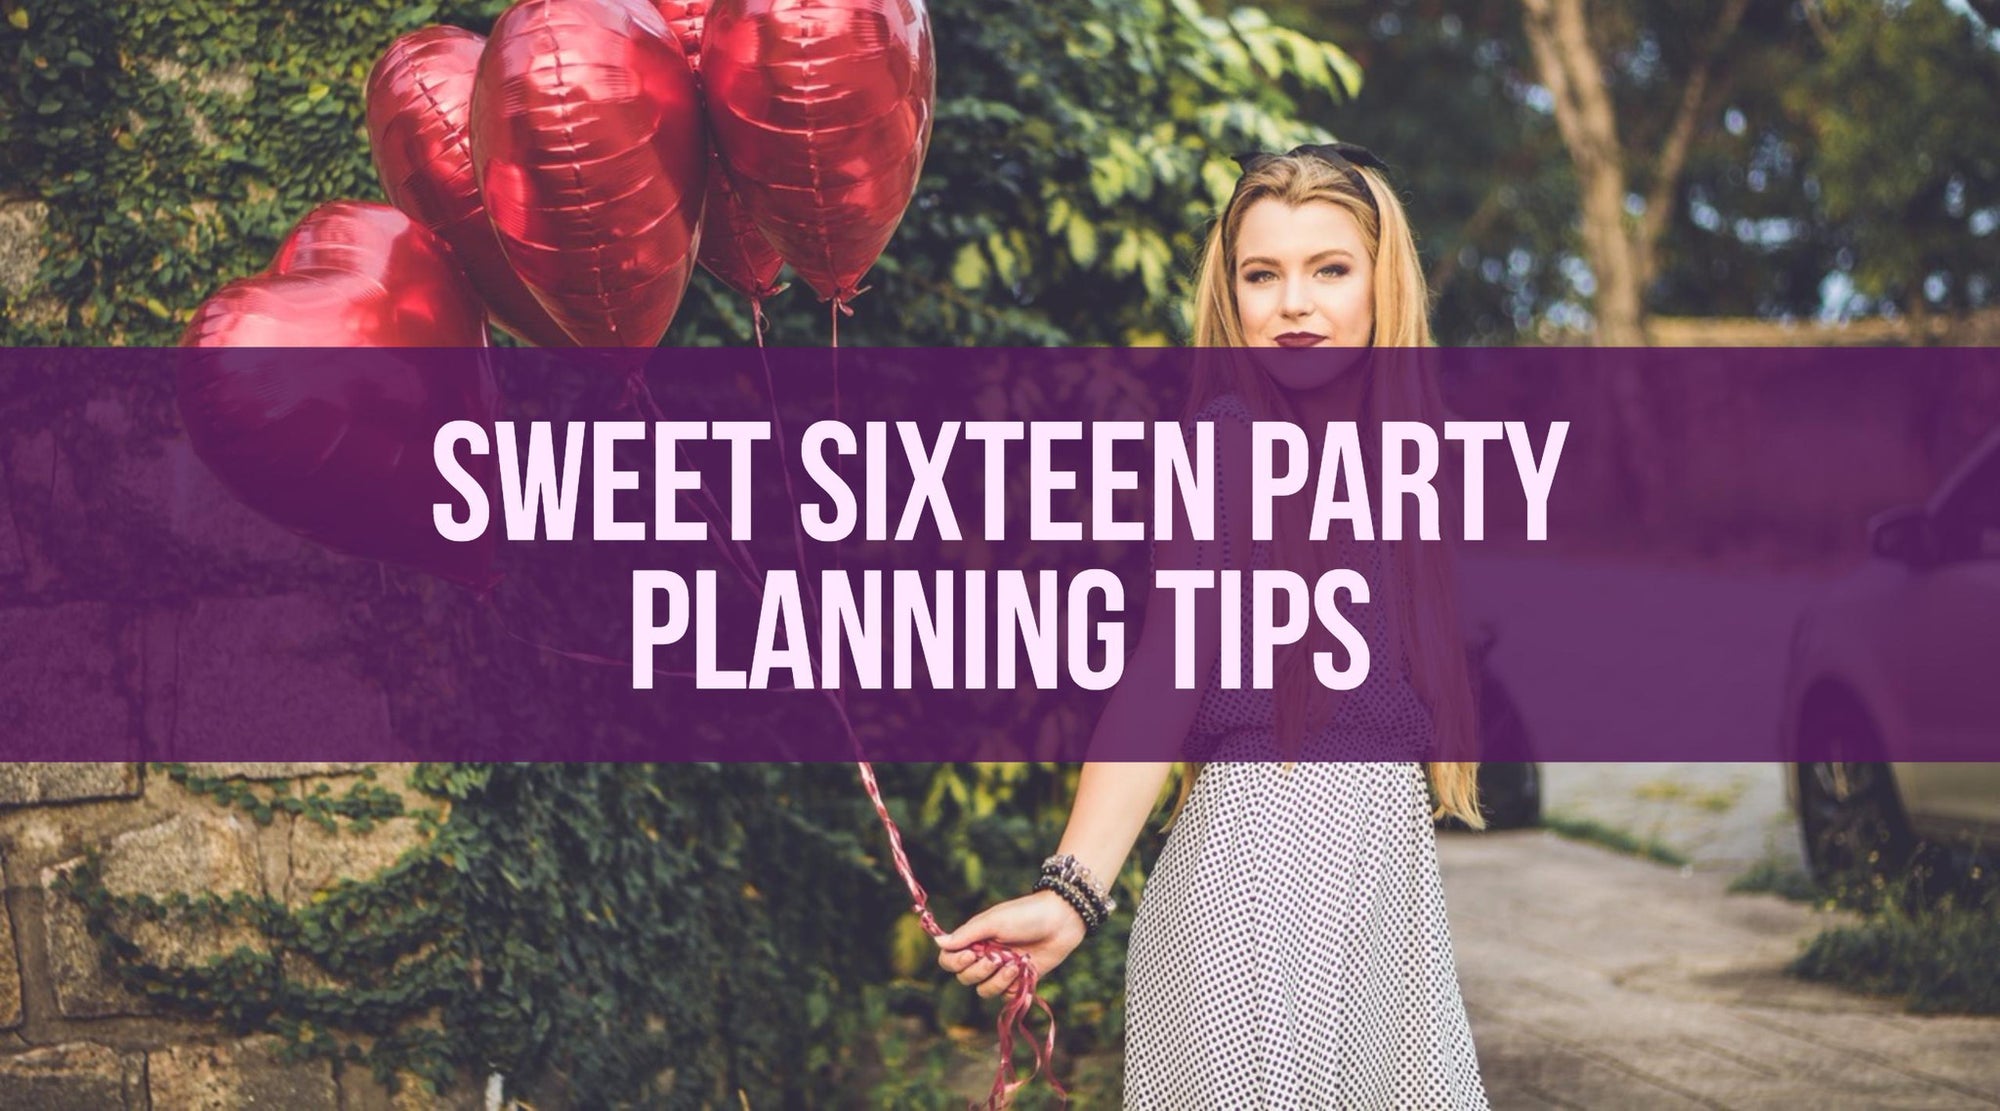 3 Simple Tips to Survive Sweet Sixteen Party Planning